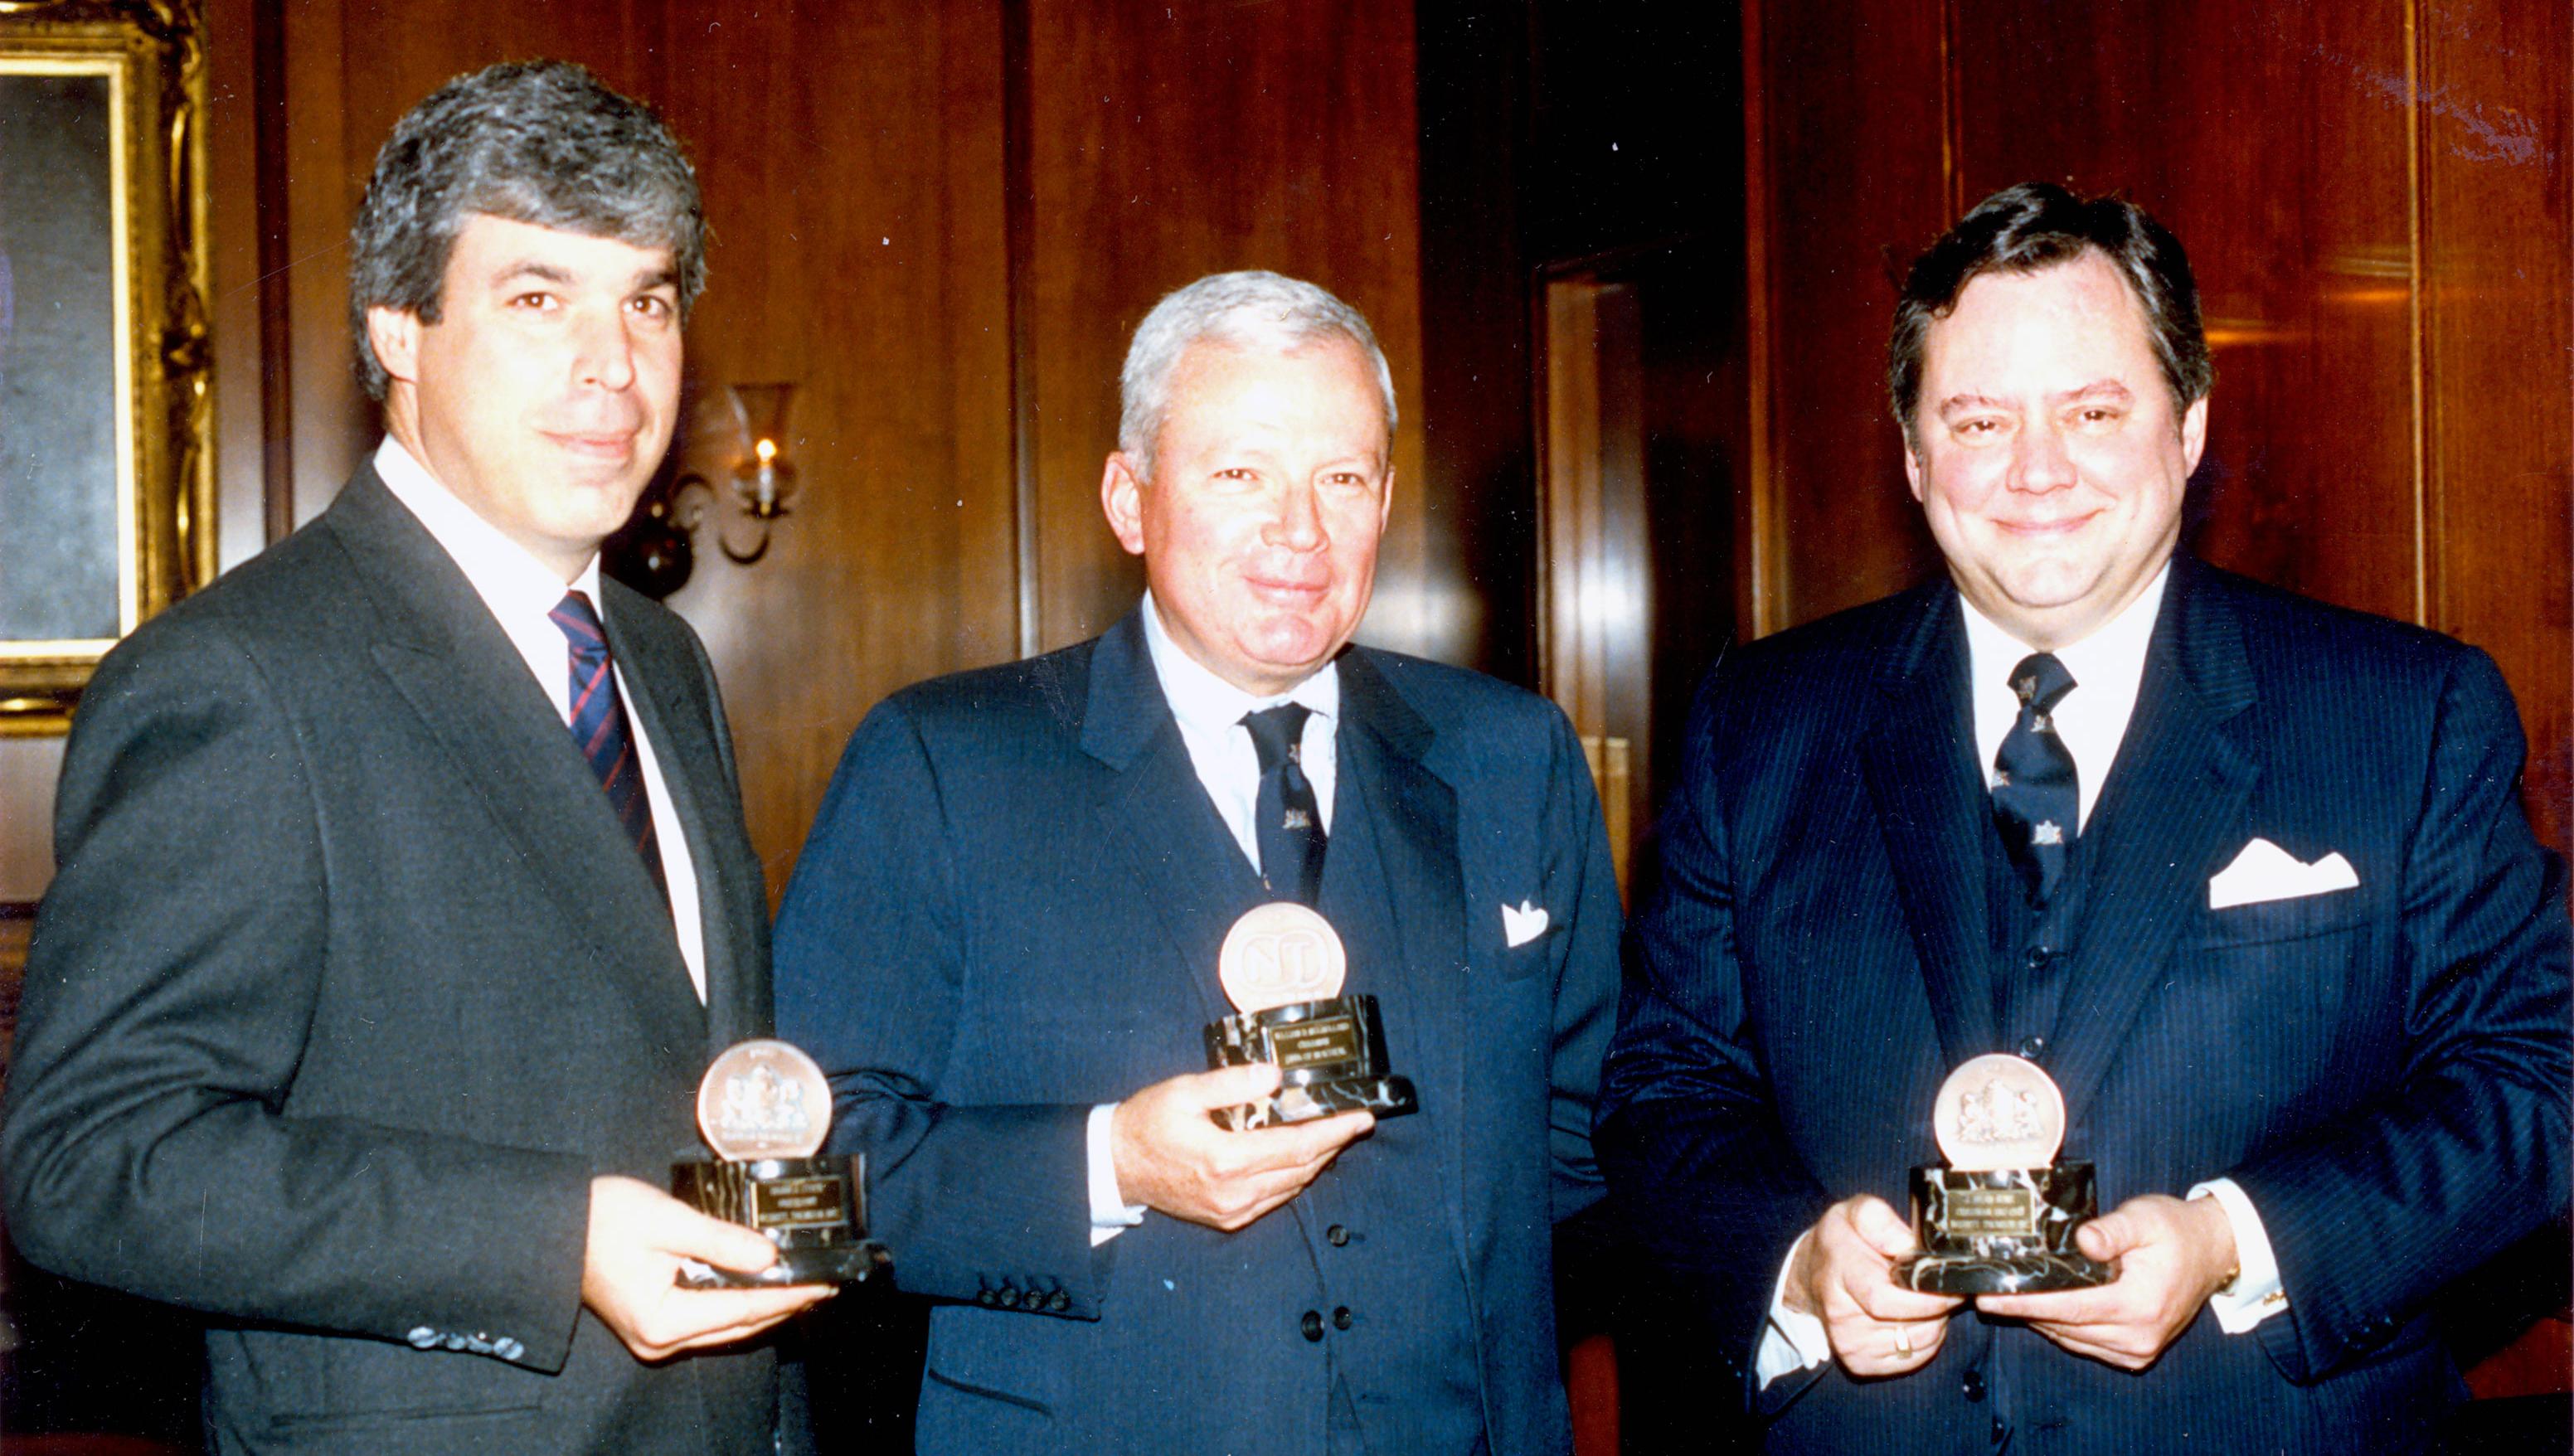 Brian Steck, President of Nebitt Thomson,  W.D. Mulholland, Chairman and CEO, Bank of Montreal, and J. Brian Aune, Chairman, Nesbitt Thomson, in October 1987 for the BMO Nesbitt Thomson merger.